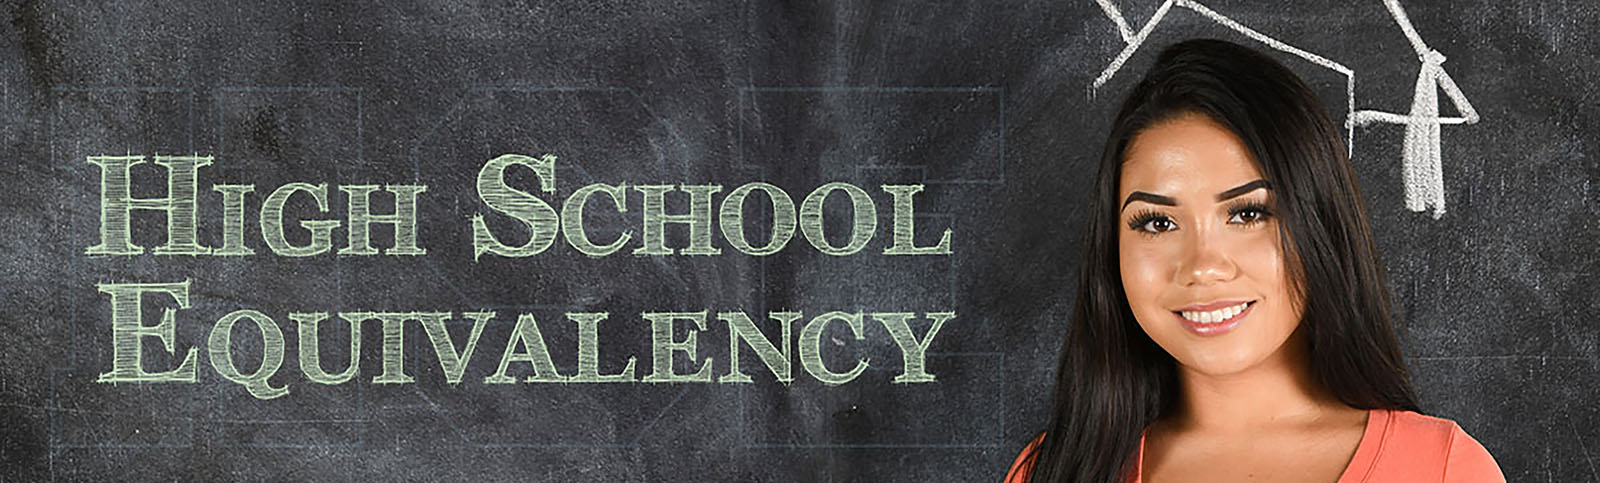  Clickable Image of student standing in front of Chalkboard with High School Equivalency written to the left